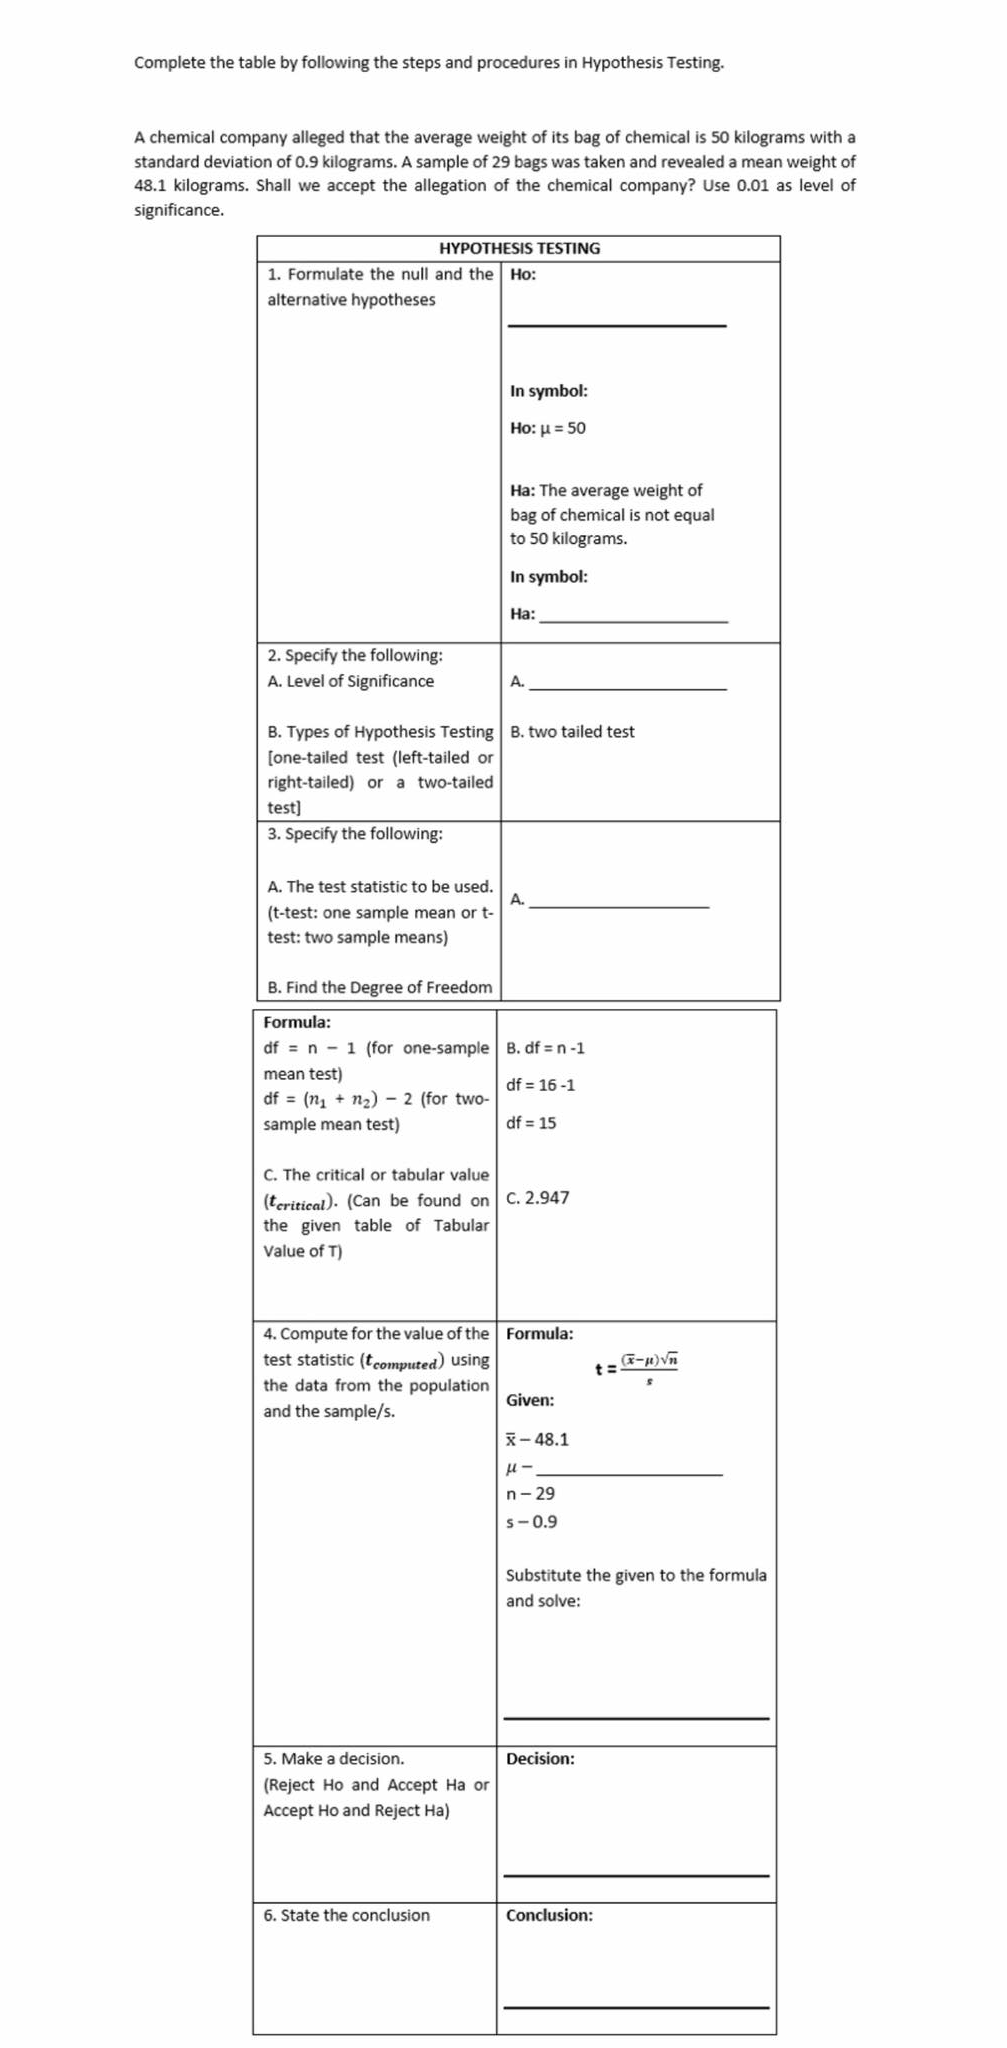 Complete the table by following the steps and procedures in Hypothesis Testing.
A chemical company alleged that the average weight of its bag of chemical is 50 kilograms with a
standard deviation of 0.9 kilograms. A sample of 29 bags was taken and revealed a mean weight of
48.1 kilograms. Shall we accept the allegation of the chemical company? Use 0.01 as level of
significance.
HYPOTHESIS TESTING
1. Formulate the null and the Ho:
alternative hypotheses
In symbol:
Ho: μ = 50
Ha: The average weight of
bag of chemical is not equal
to 50 kilograms.
In symbol:
Ha:
2. Specify the following:
A. Level of Significance
A.
B. Types of Hypothesis Testing B. two tailed test
[one-tailed test (left-tailed or
right-tailed) or a two-tailed
test]
3. Specify the following:
A. The test statistic to be used.
(t-test: one sample mean or t-
test: two sample means)
B. Find the Degree of Freedom
Formula:
df = n 1 (for one-sample B. df = n-1
mean test)
df = 16-1
df = (₁ + n₂) 2 (for two-
sample mean test)
df = 15
C. The critical or tabular value
(teritical). (Can be found on C. 2.947
the given table of Tabular
Value of T)
4. Compute for the value of the Formula:
test statistic (t computed) using
(x-µ)√n
the data from the population
and the sample/s.
Given:
X-48.1
H-
n-29
s-0.9
Substitute the given to the formula
and solve:
Decision:
5. Make a decision.
(Reject Ho and Accept Ha or
Accept Ho and Reject Ha)
6. State the conclusion
Conclusion:
A.